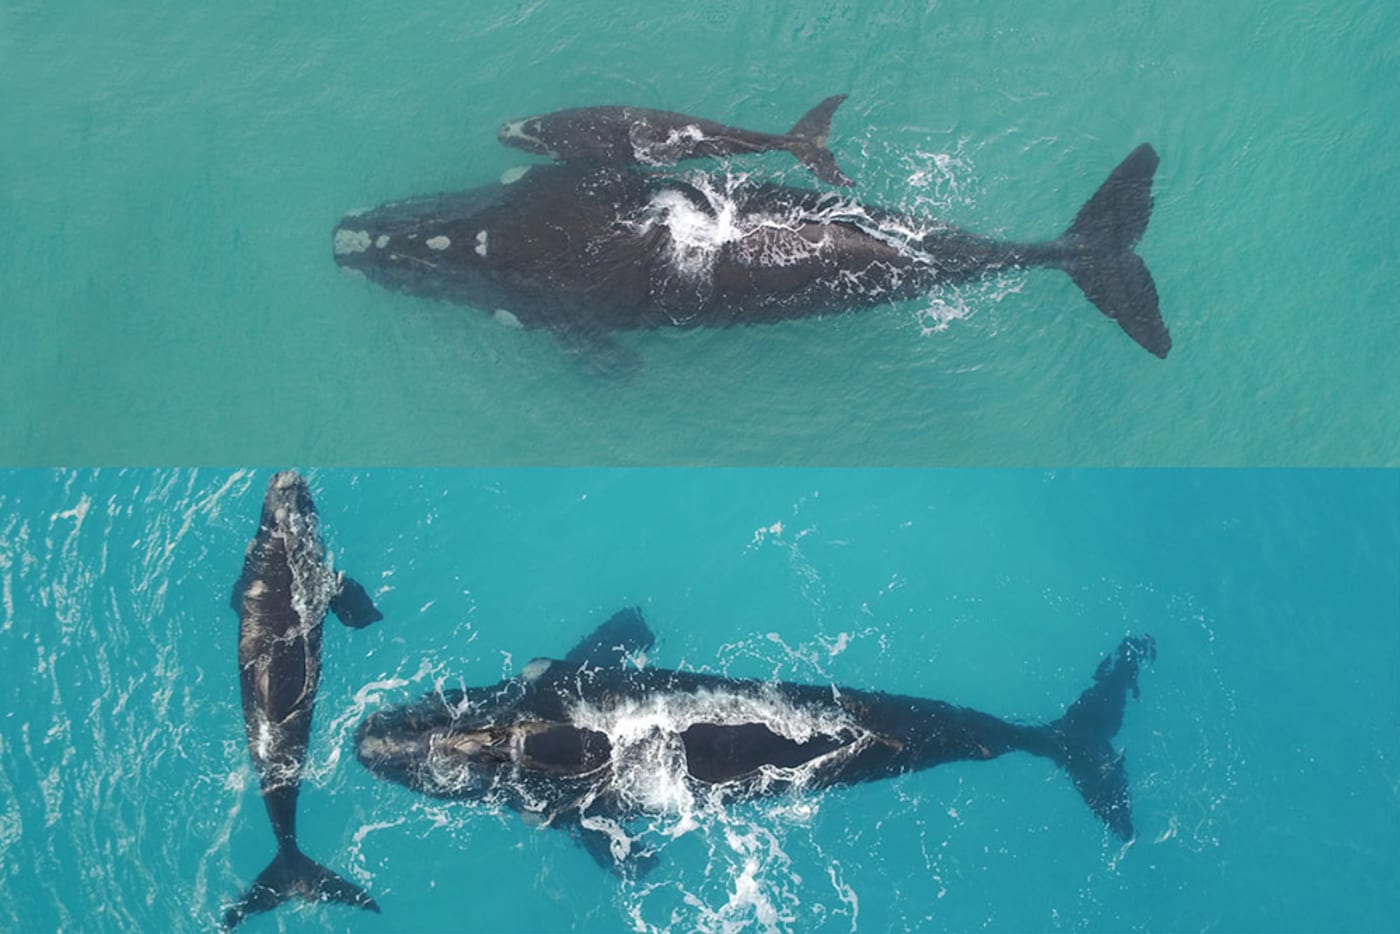 Maybeline= Southern right whale (composite image)